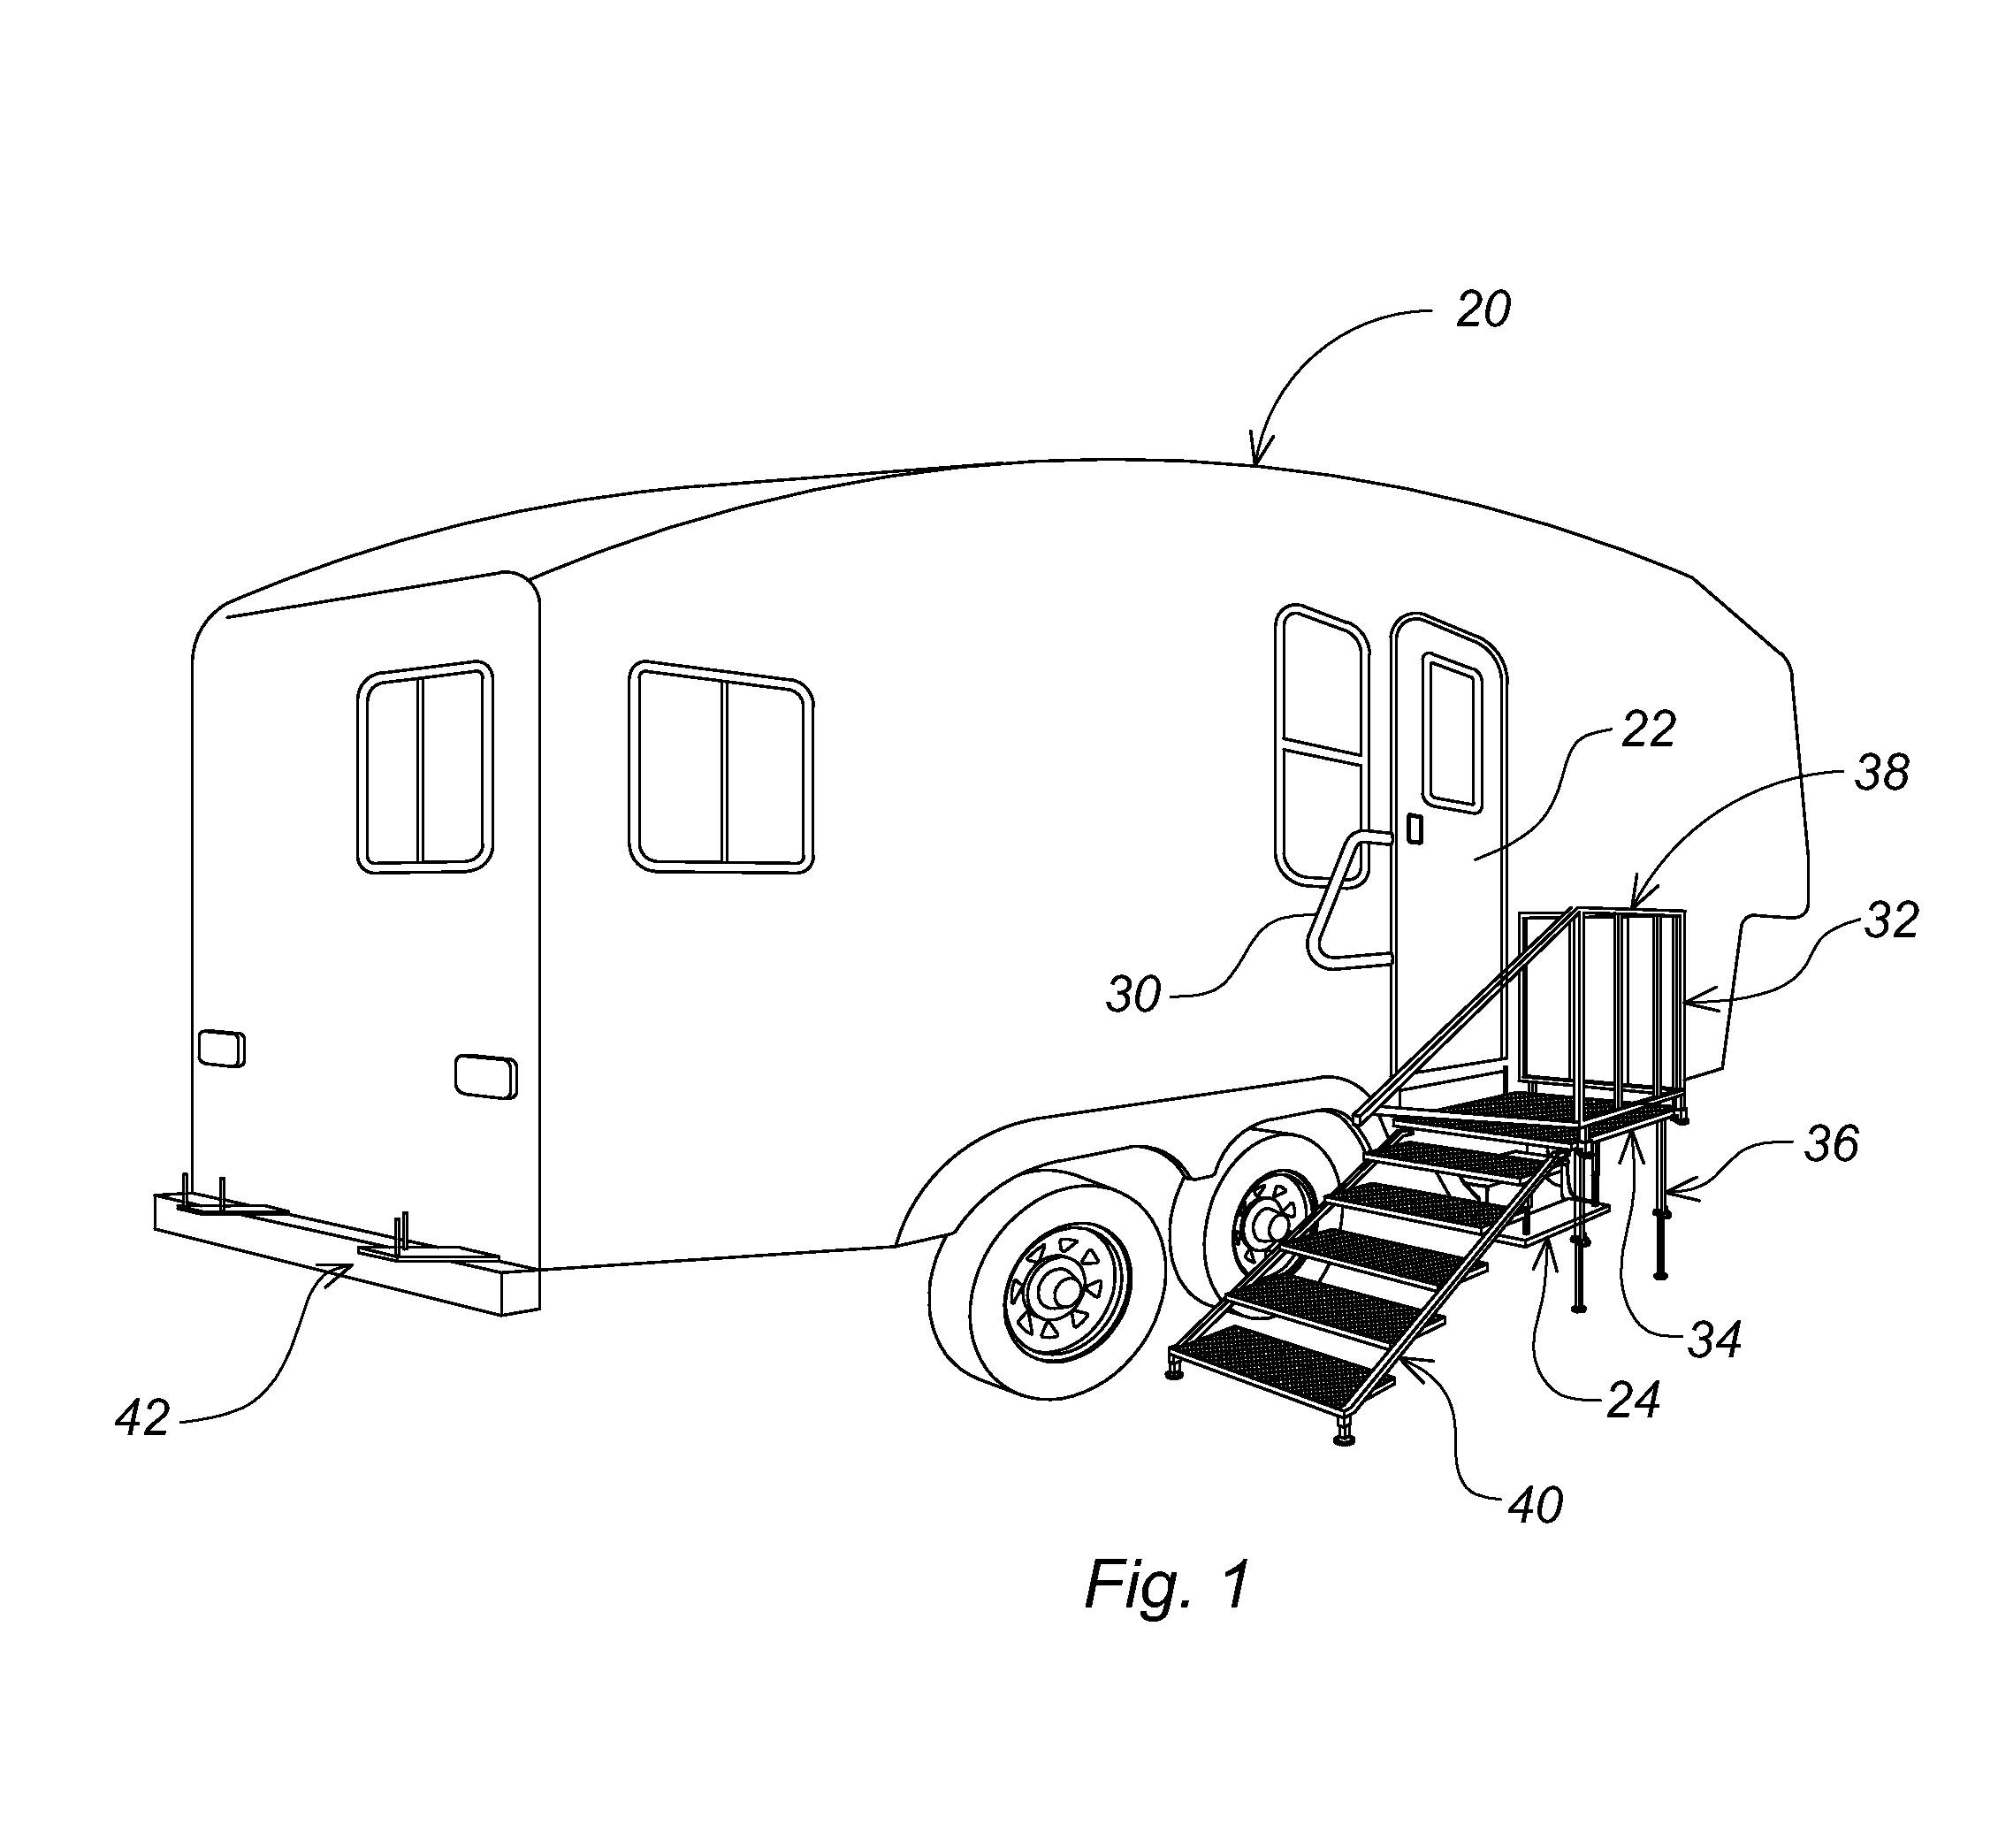 Portable porch with integral stairs